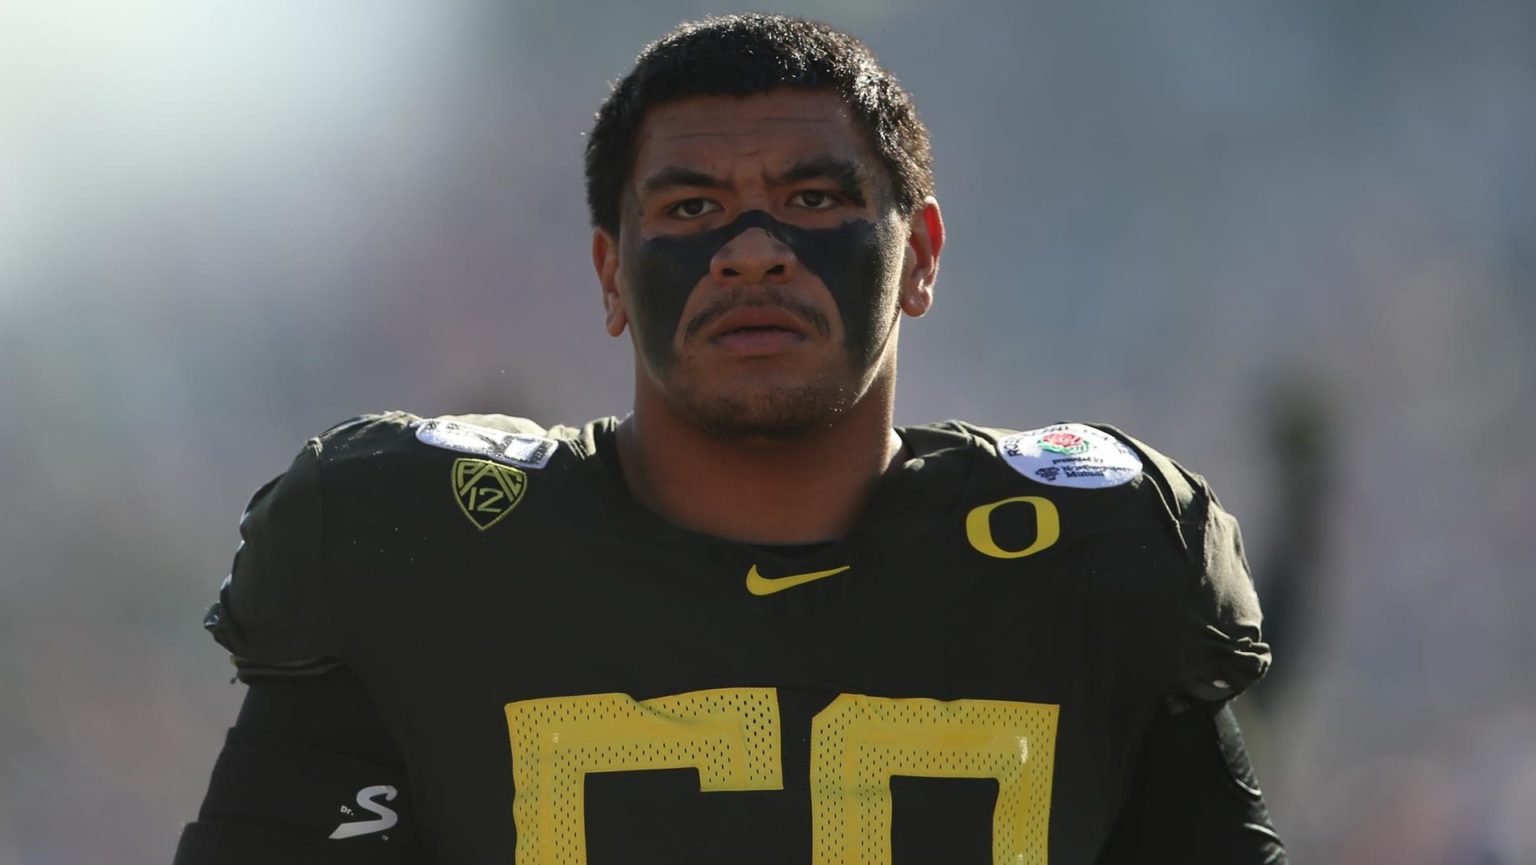 2021 NFL Draft profile of Oregon offensive tackle Penei Sewell, including stats, highlights, breakdown and draft projection.